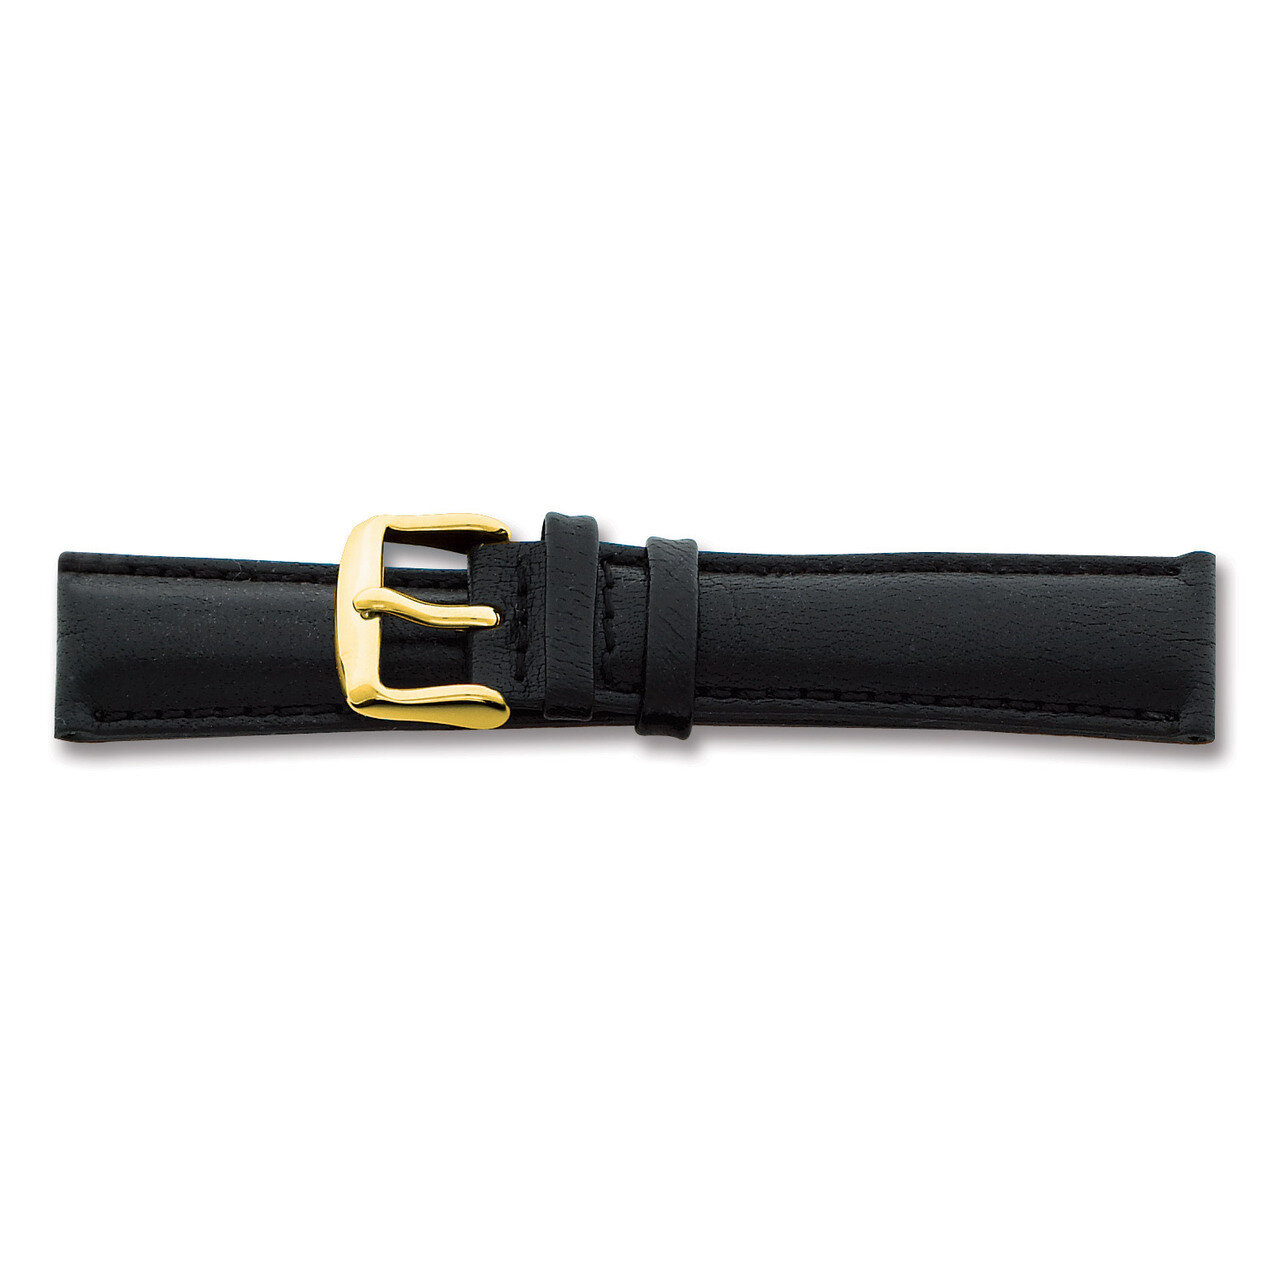 24mm Short Black Smooth Leather Chrono Bkl Watch Band 6.75 Inch Gold-tone BAY141S-24